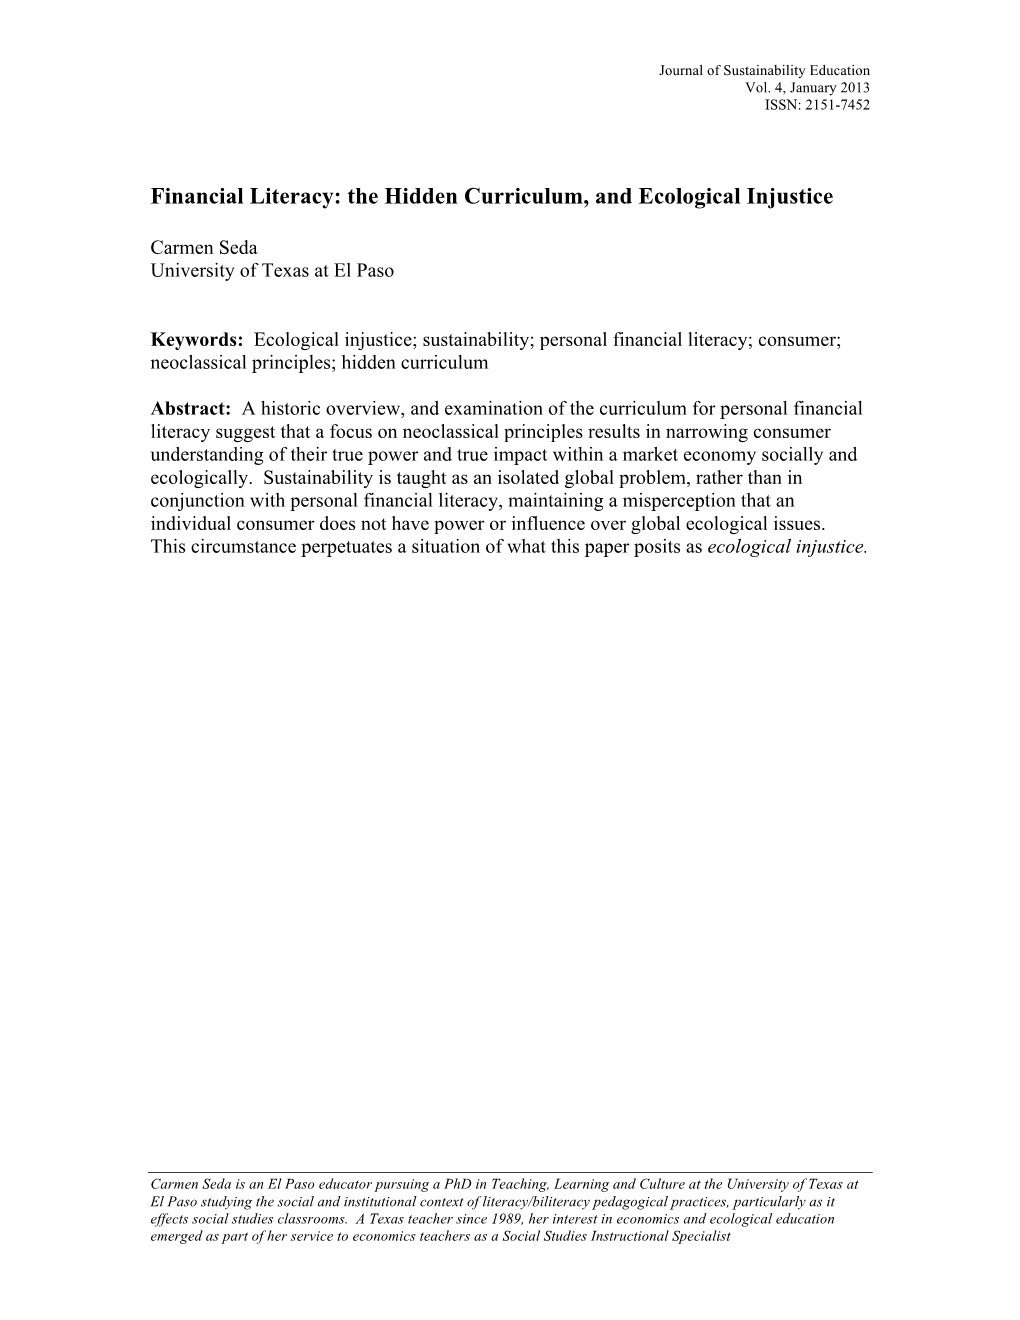 Financial Literacy: the Hidden Curriculum, and Ecological Injustice